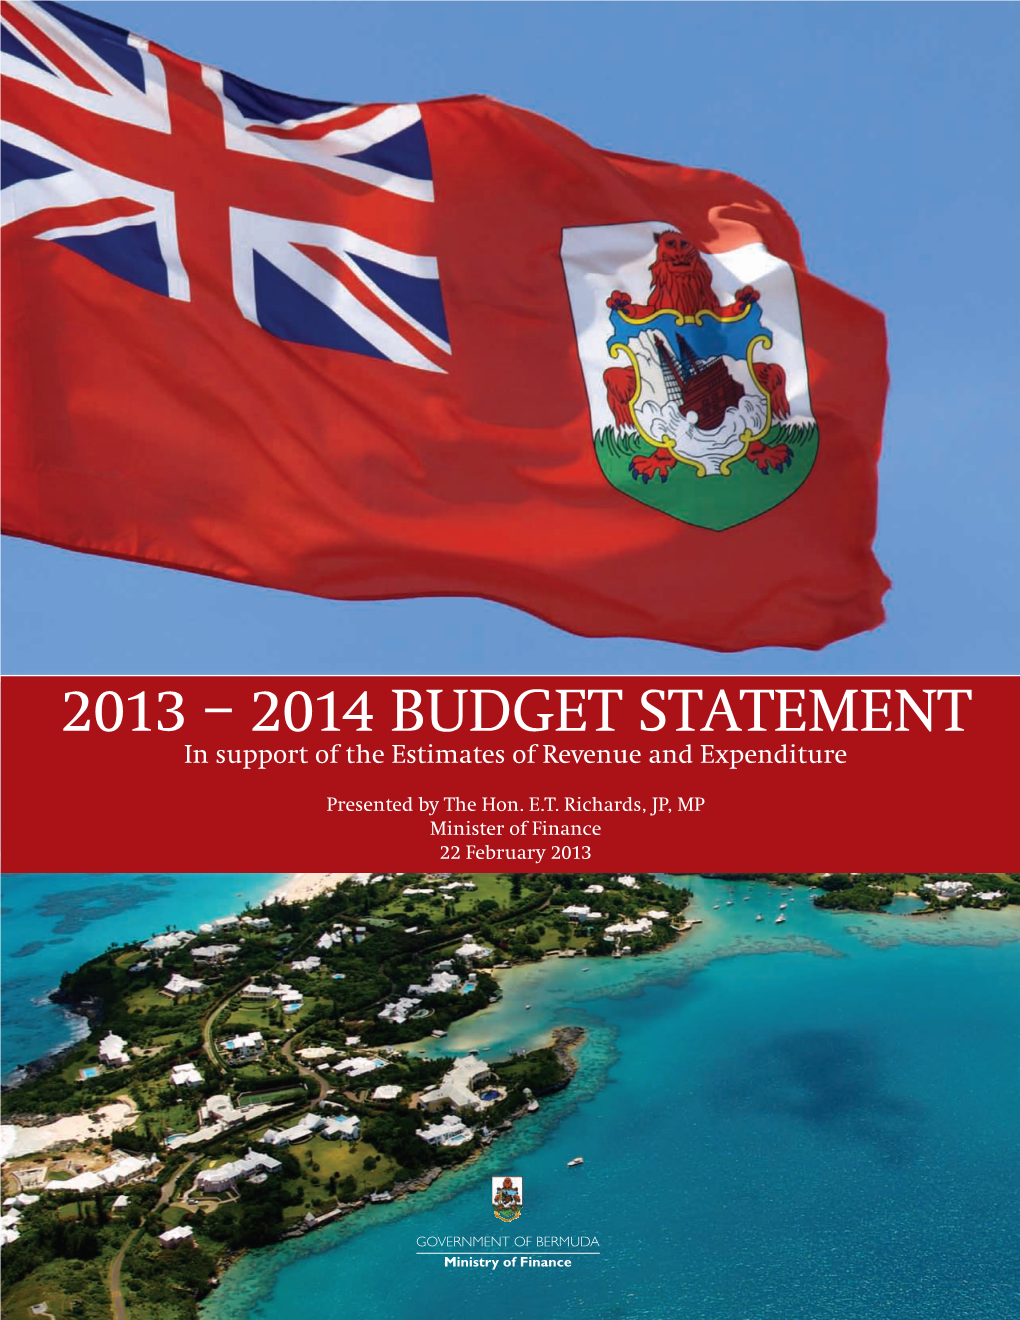 2013 – 2014 BUDGET STATEMENT in Support of the Estimates of Revenue and Expenditure